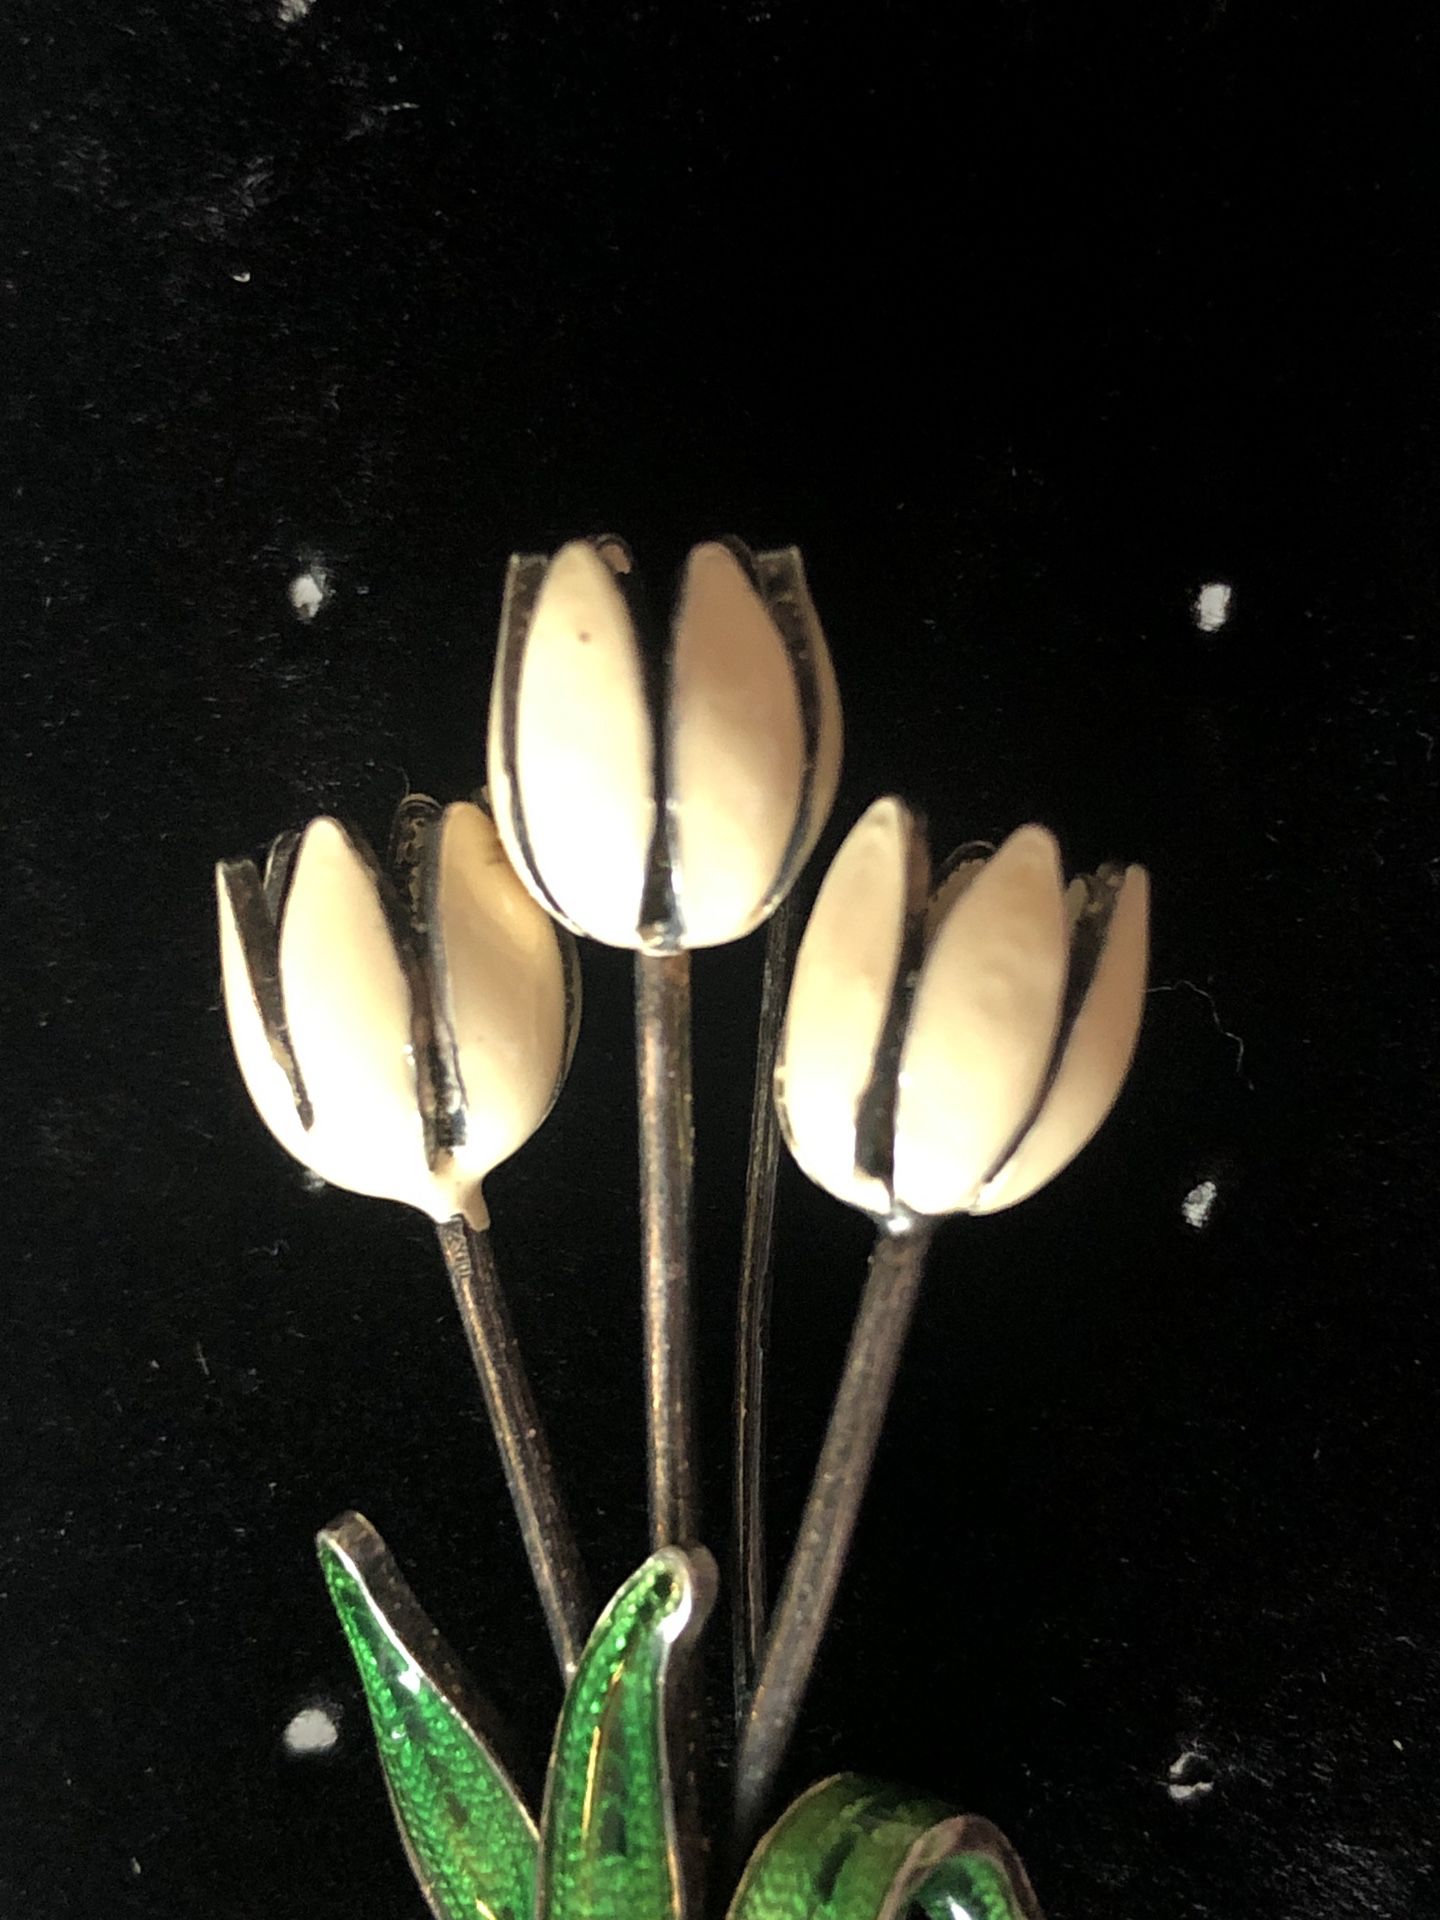  Vintage Sterling Silver 925 and Enamel Tulip Pin Brooch, White Tulips